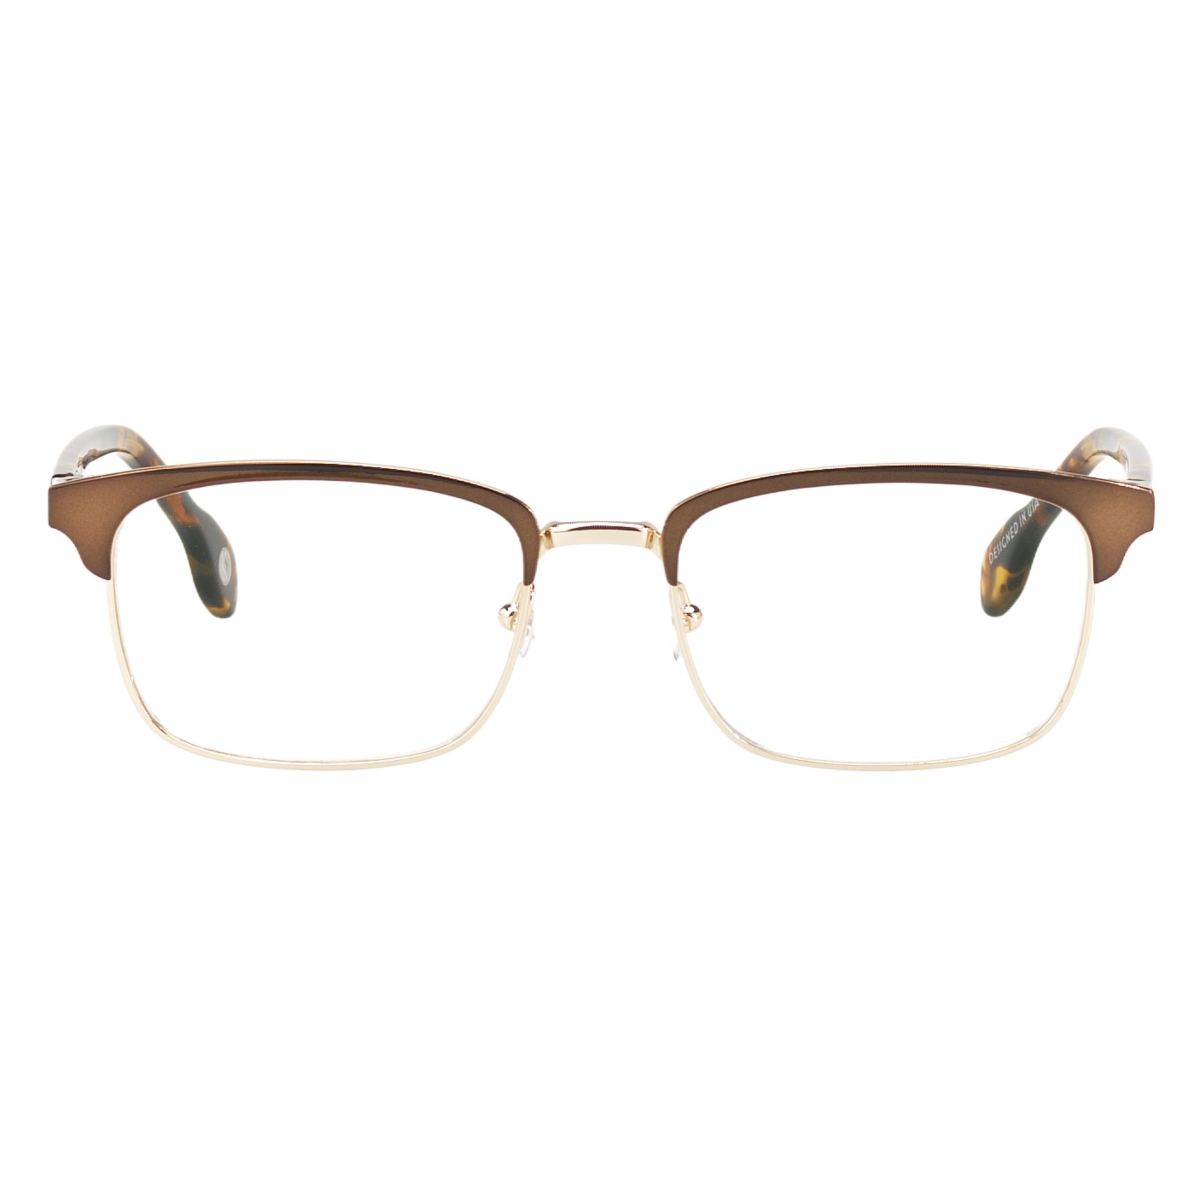 Sugar Specs - The Diplomat 03 Brown and Gold